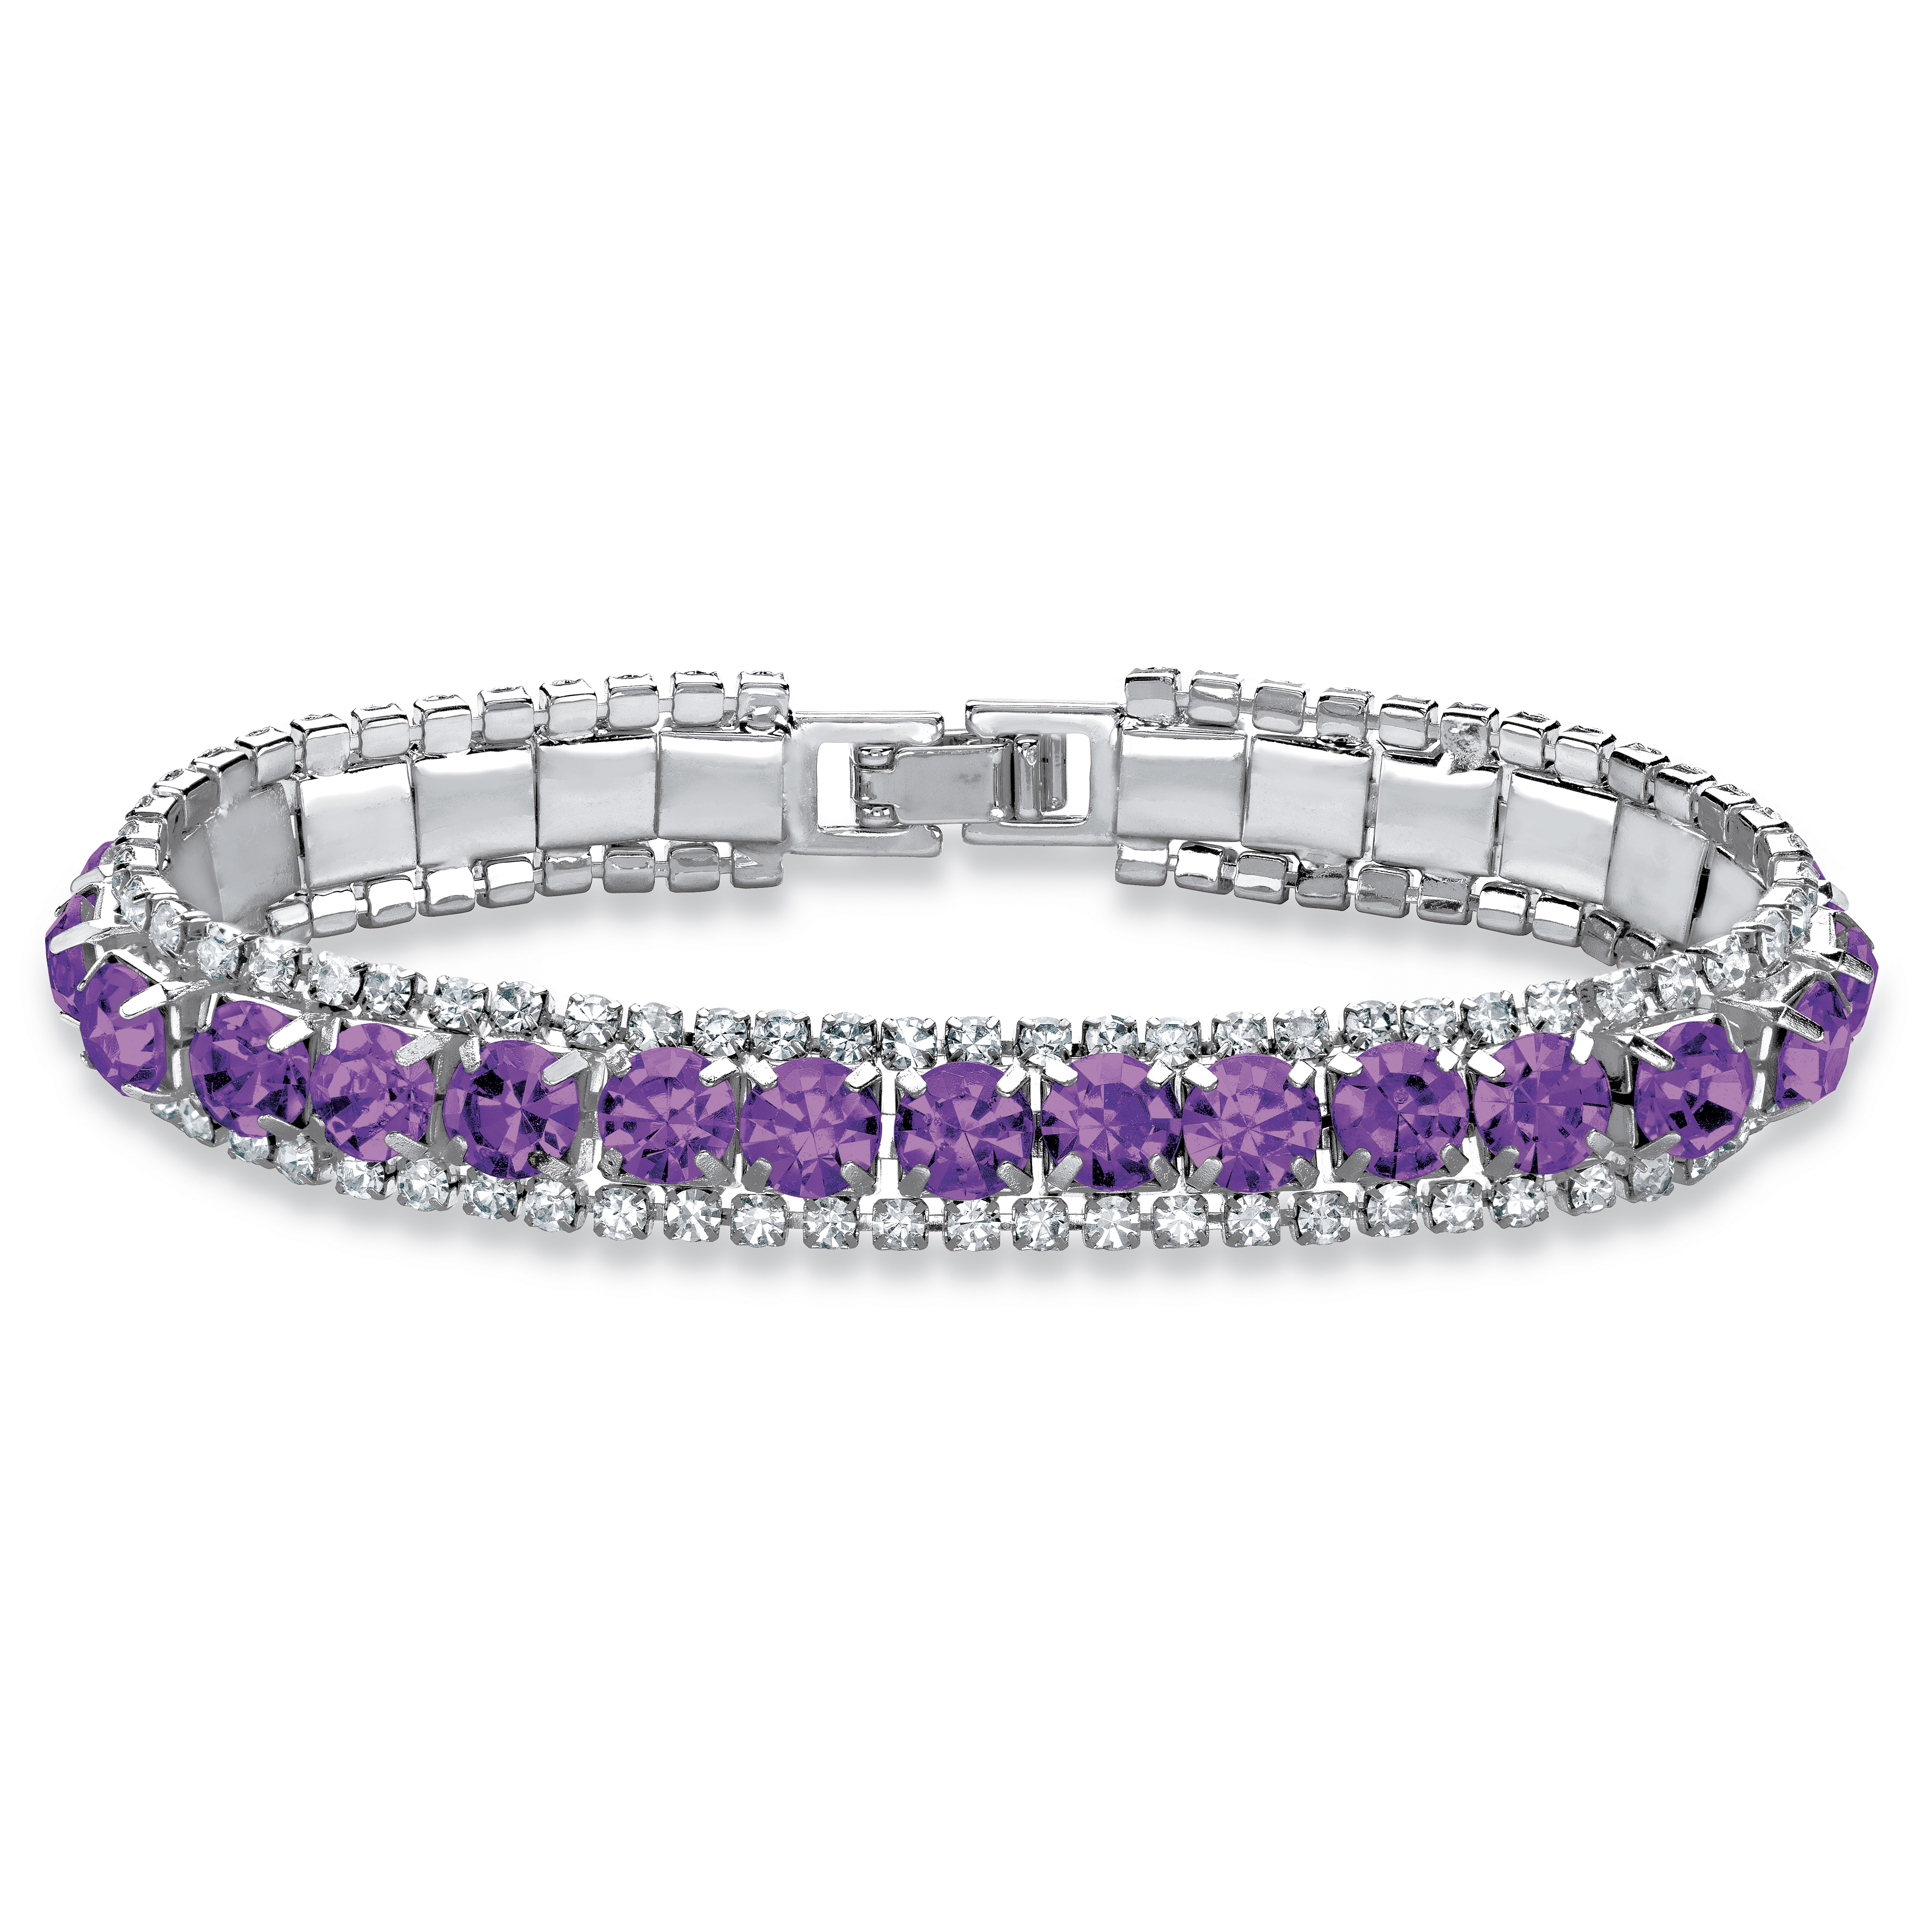 Selected Color is February- Simulated Amethyst